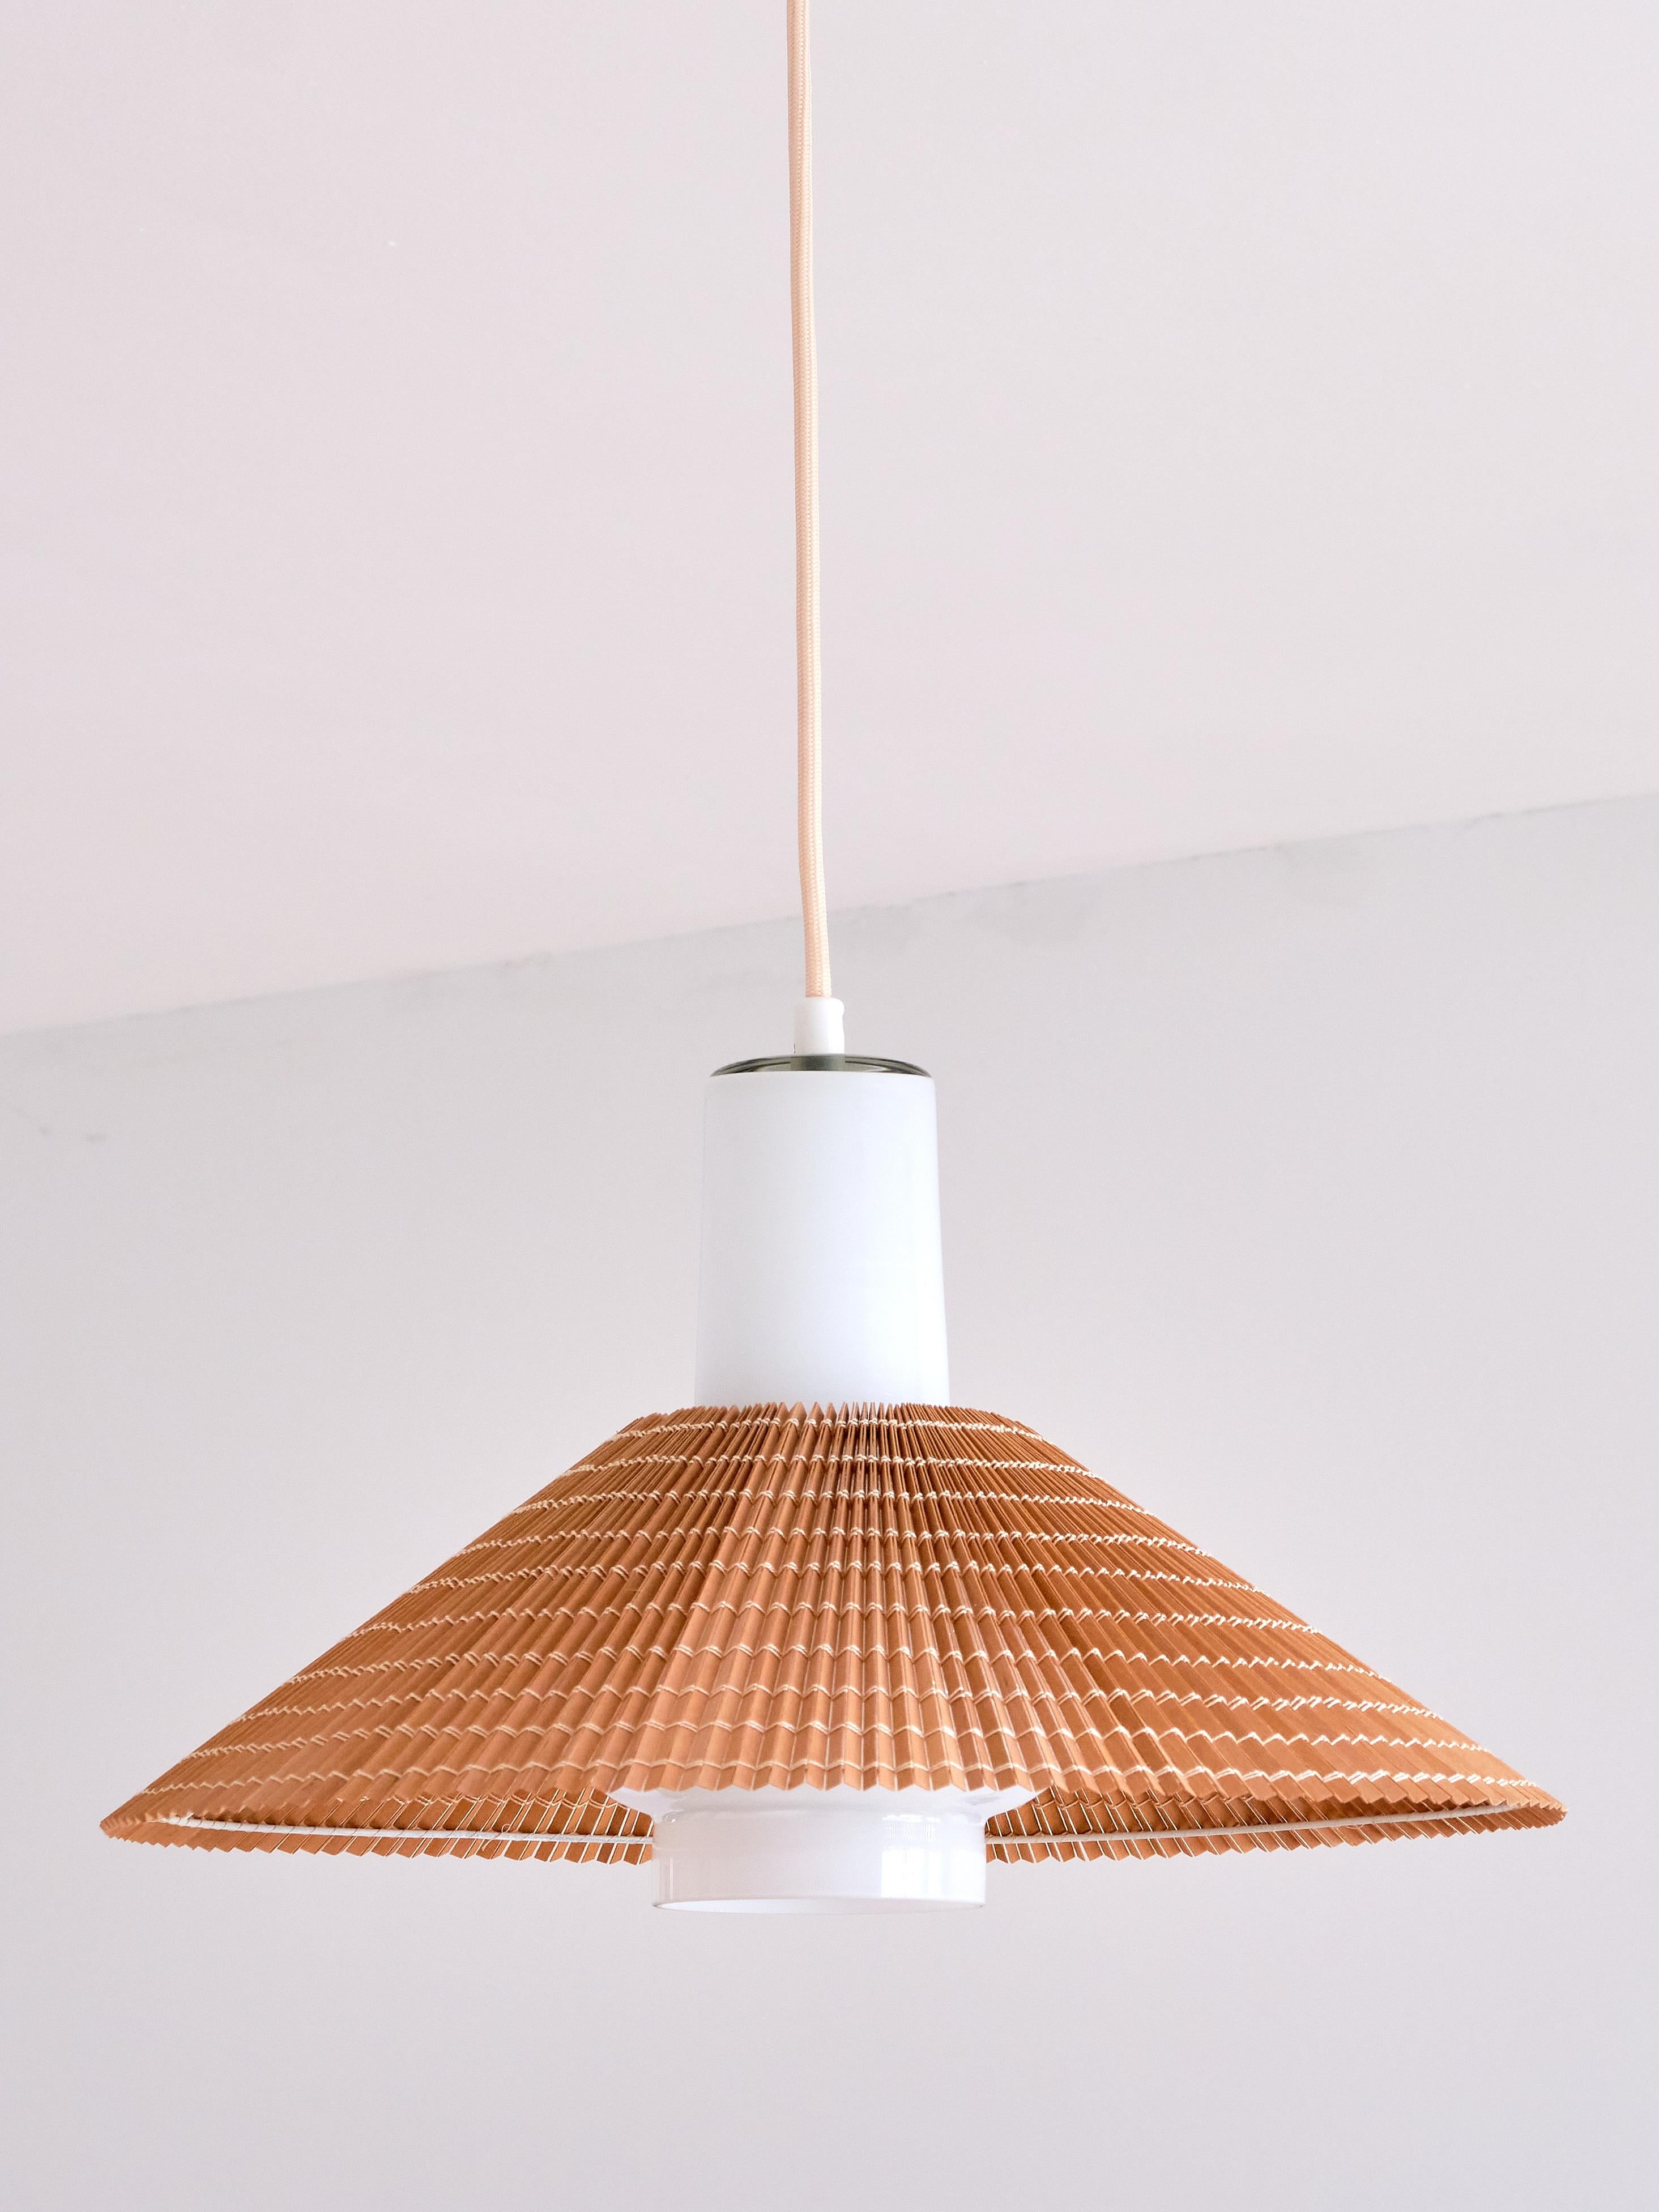 This rare pendant was designed by Paavo Tynell and produced by Idman in Finland. This model K3-43 was produced in the early 1950s and came with a range of shades including fabric shades and the more rare lamellar wood shades.

The fixture consists